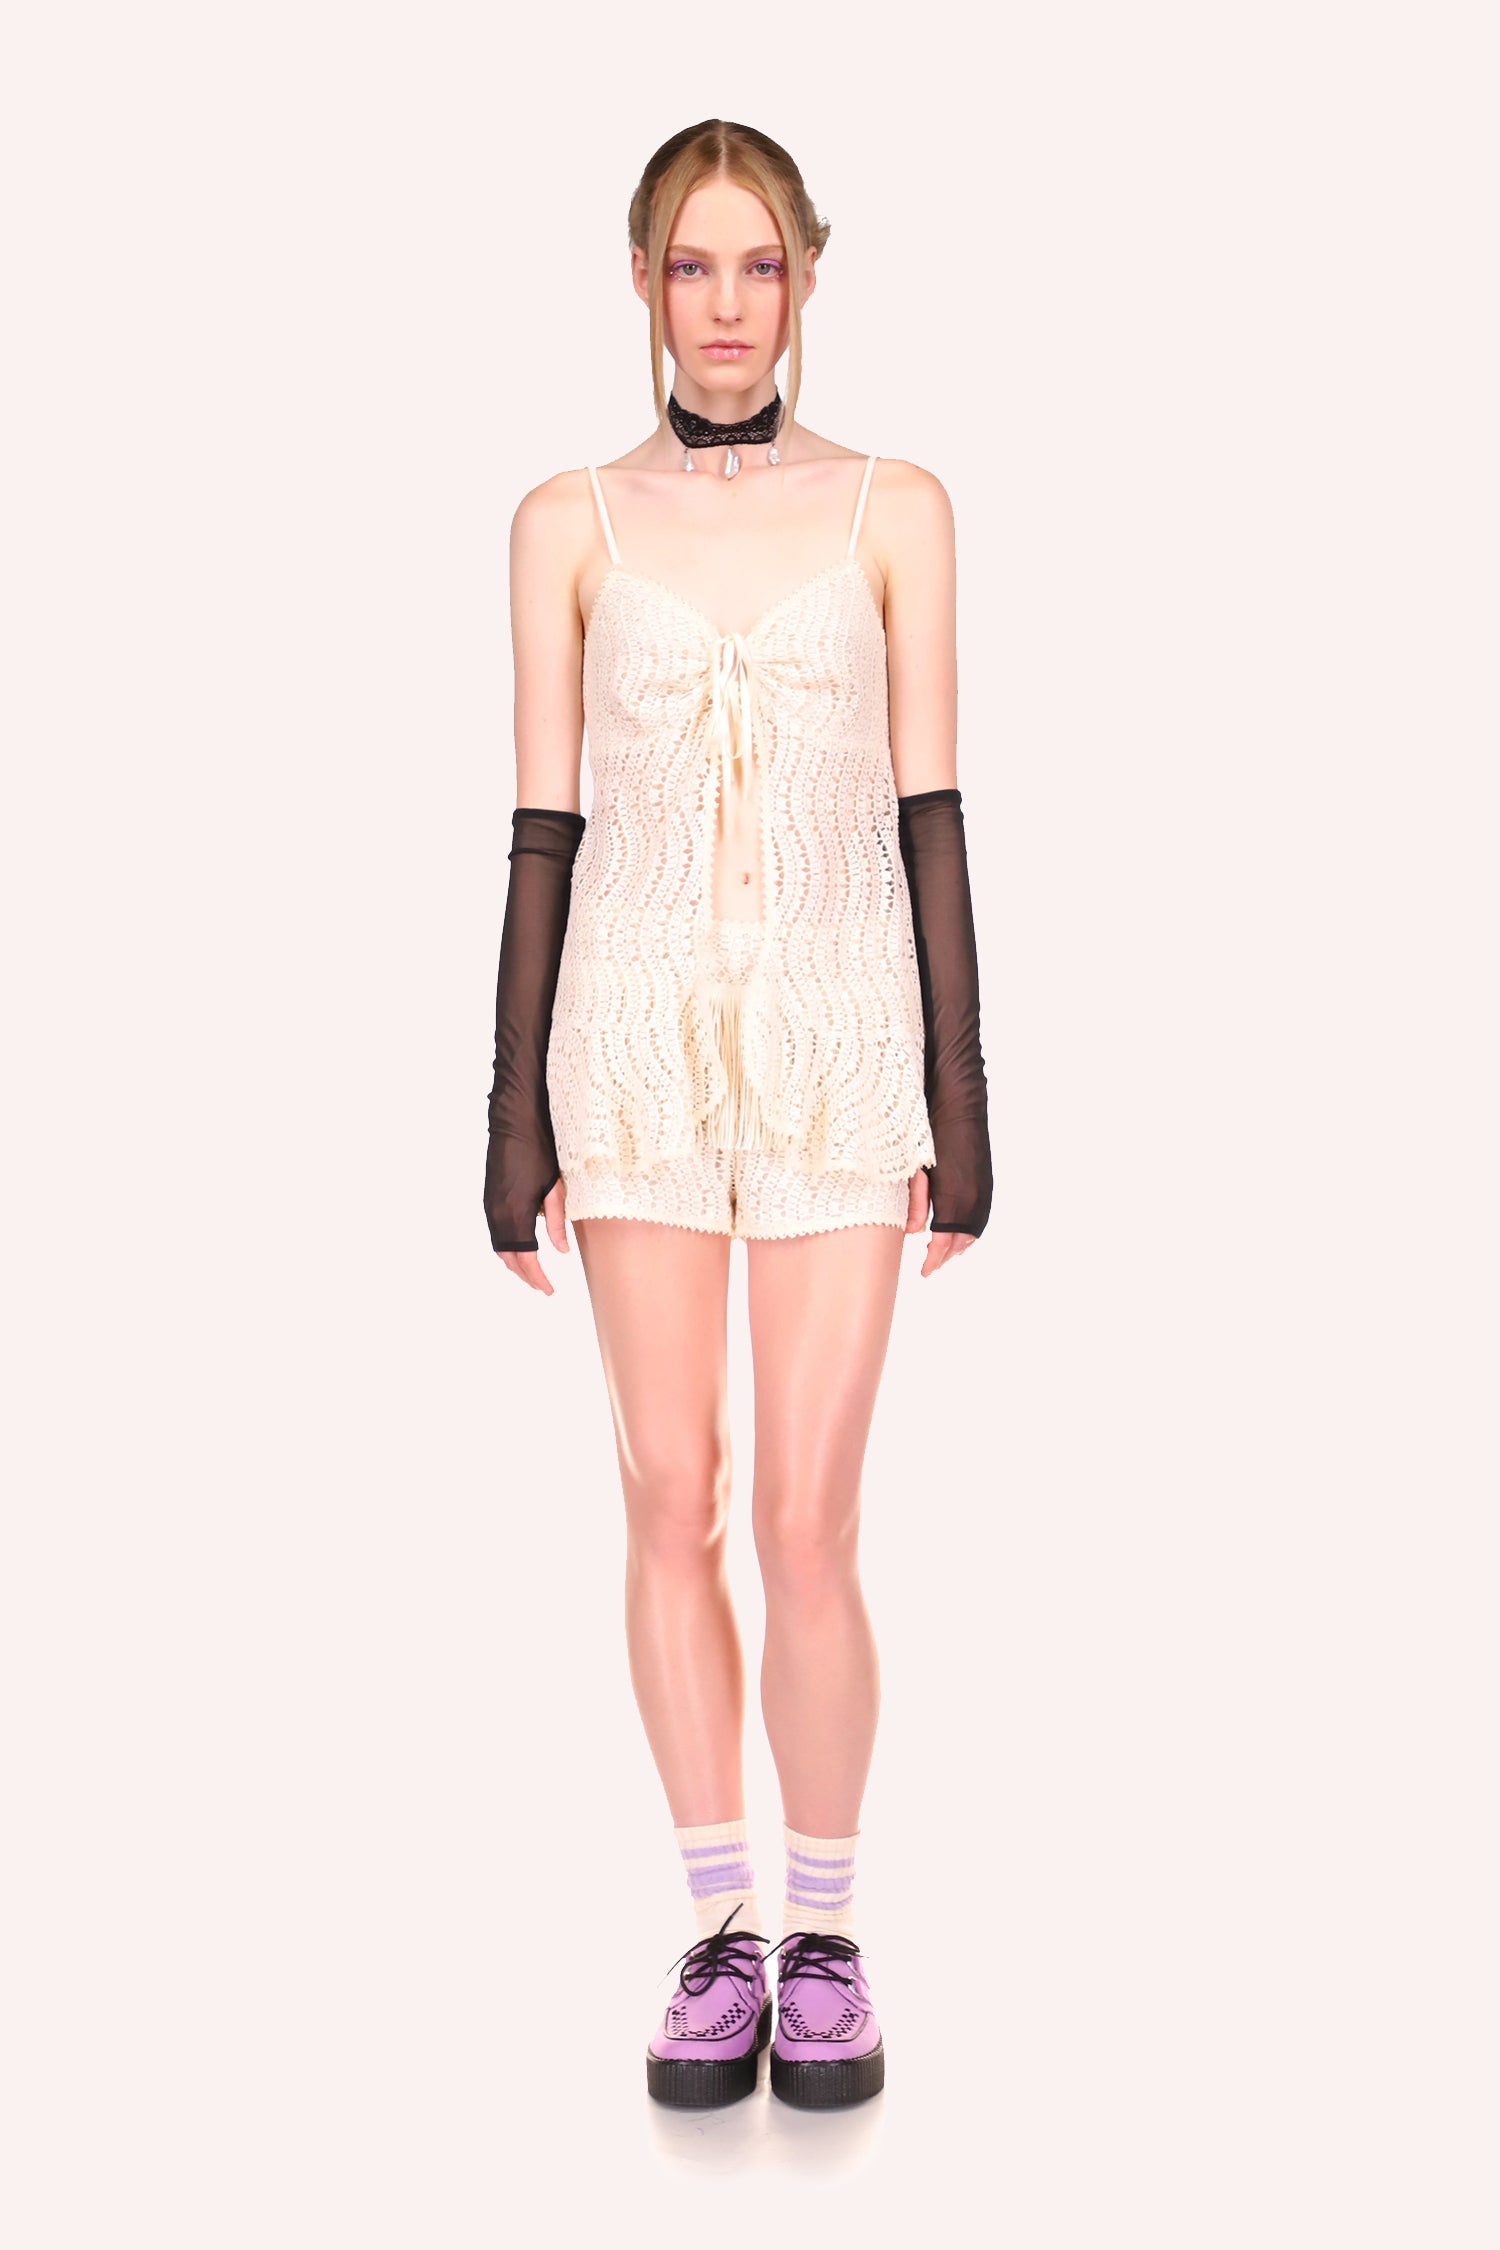 Crochet Lace Shorts in Cream match perfectly with the Anna Sui Crochet Lace Tie Top in Cream